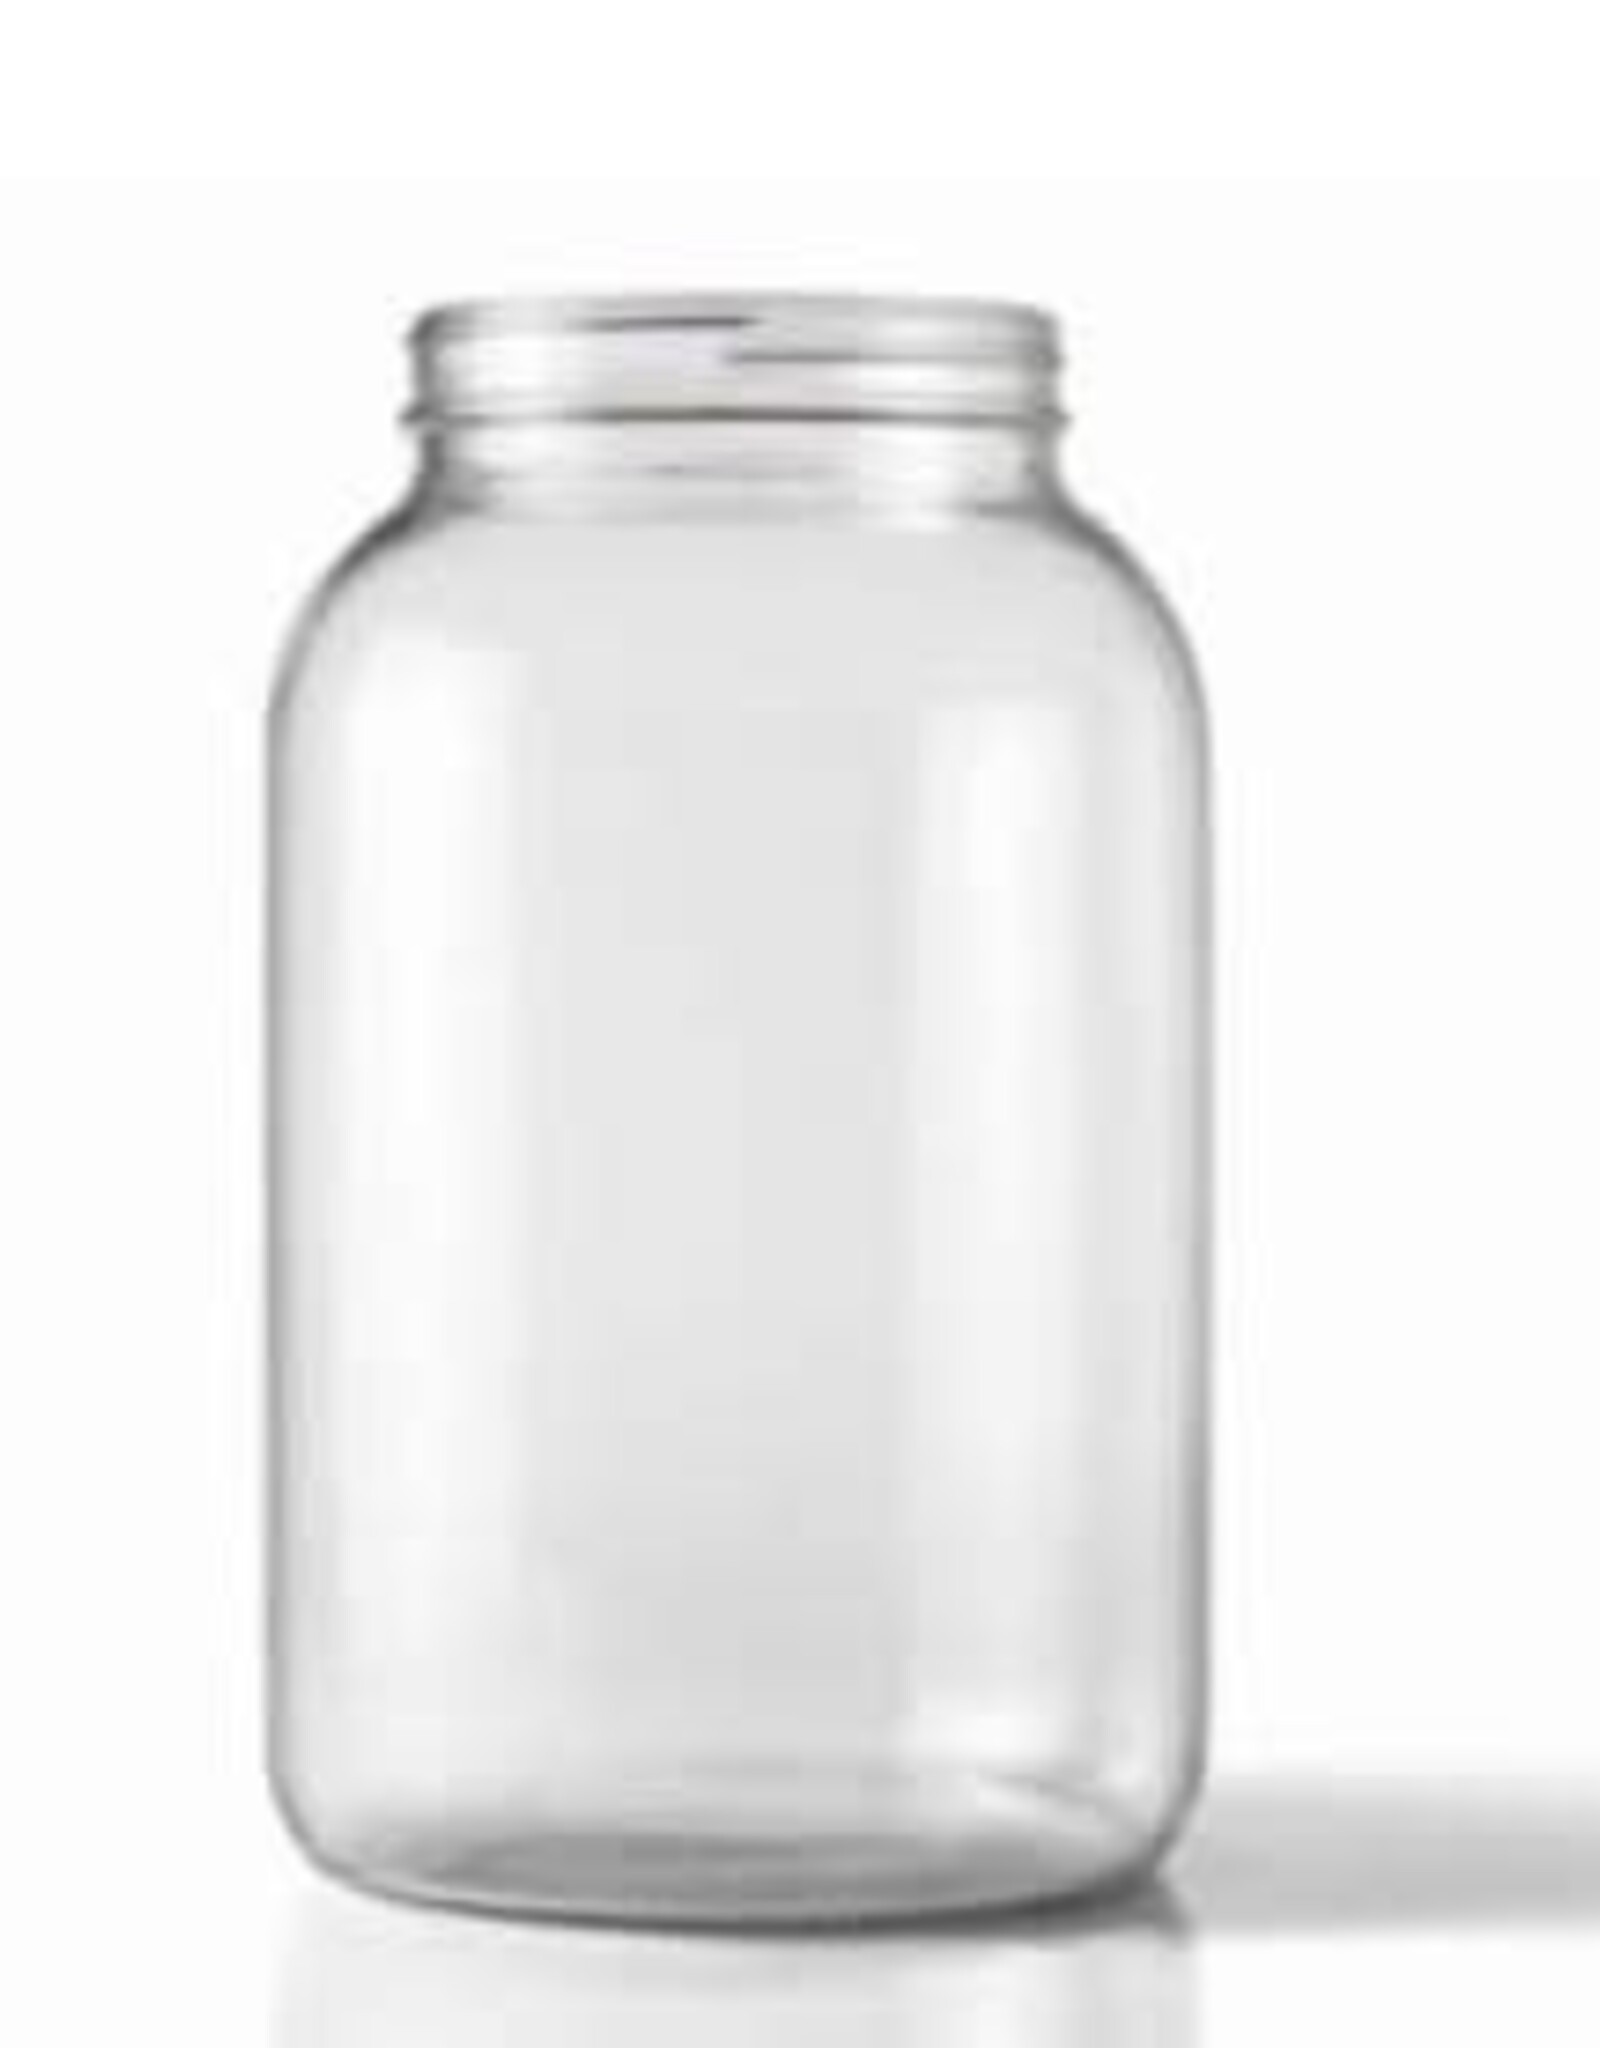 WIDE MOUTH CLEAR ONE GALLON